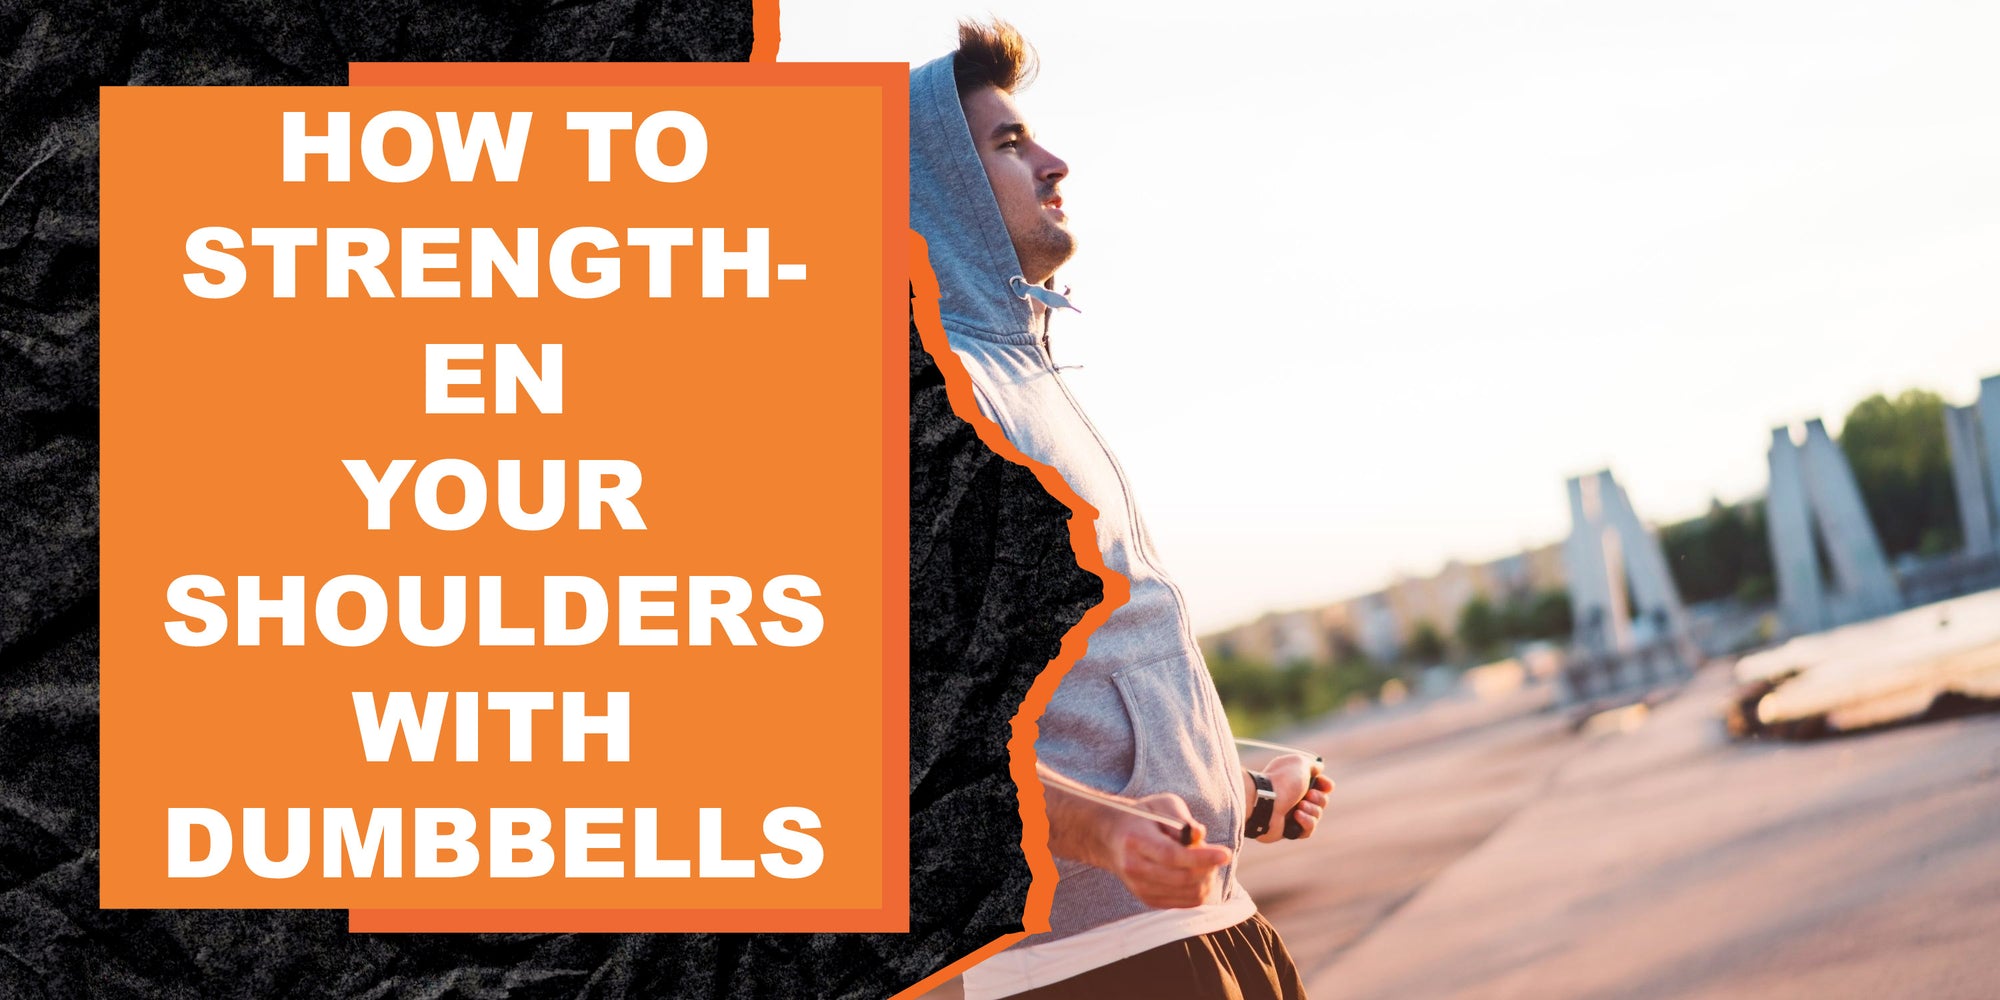 How to Strengthen Your Shoulders with Dumbbells